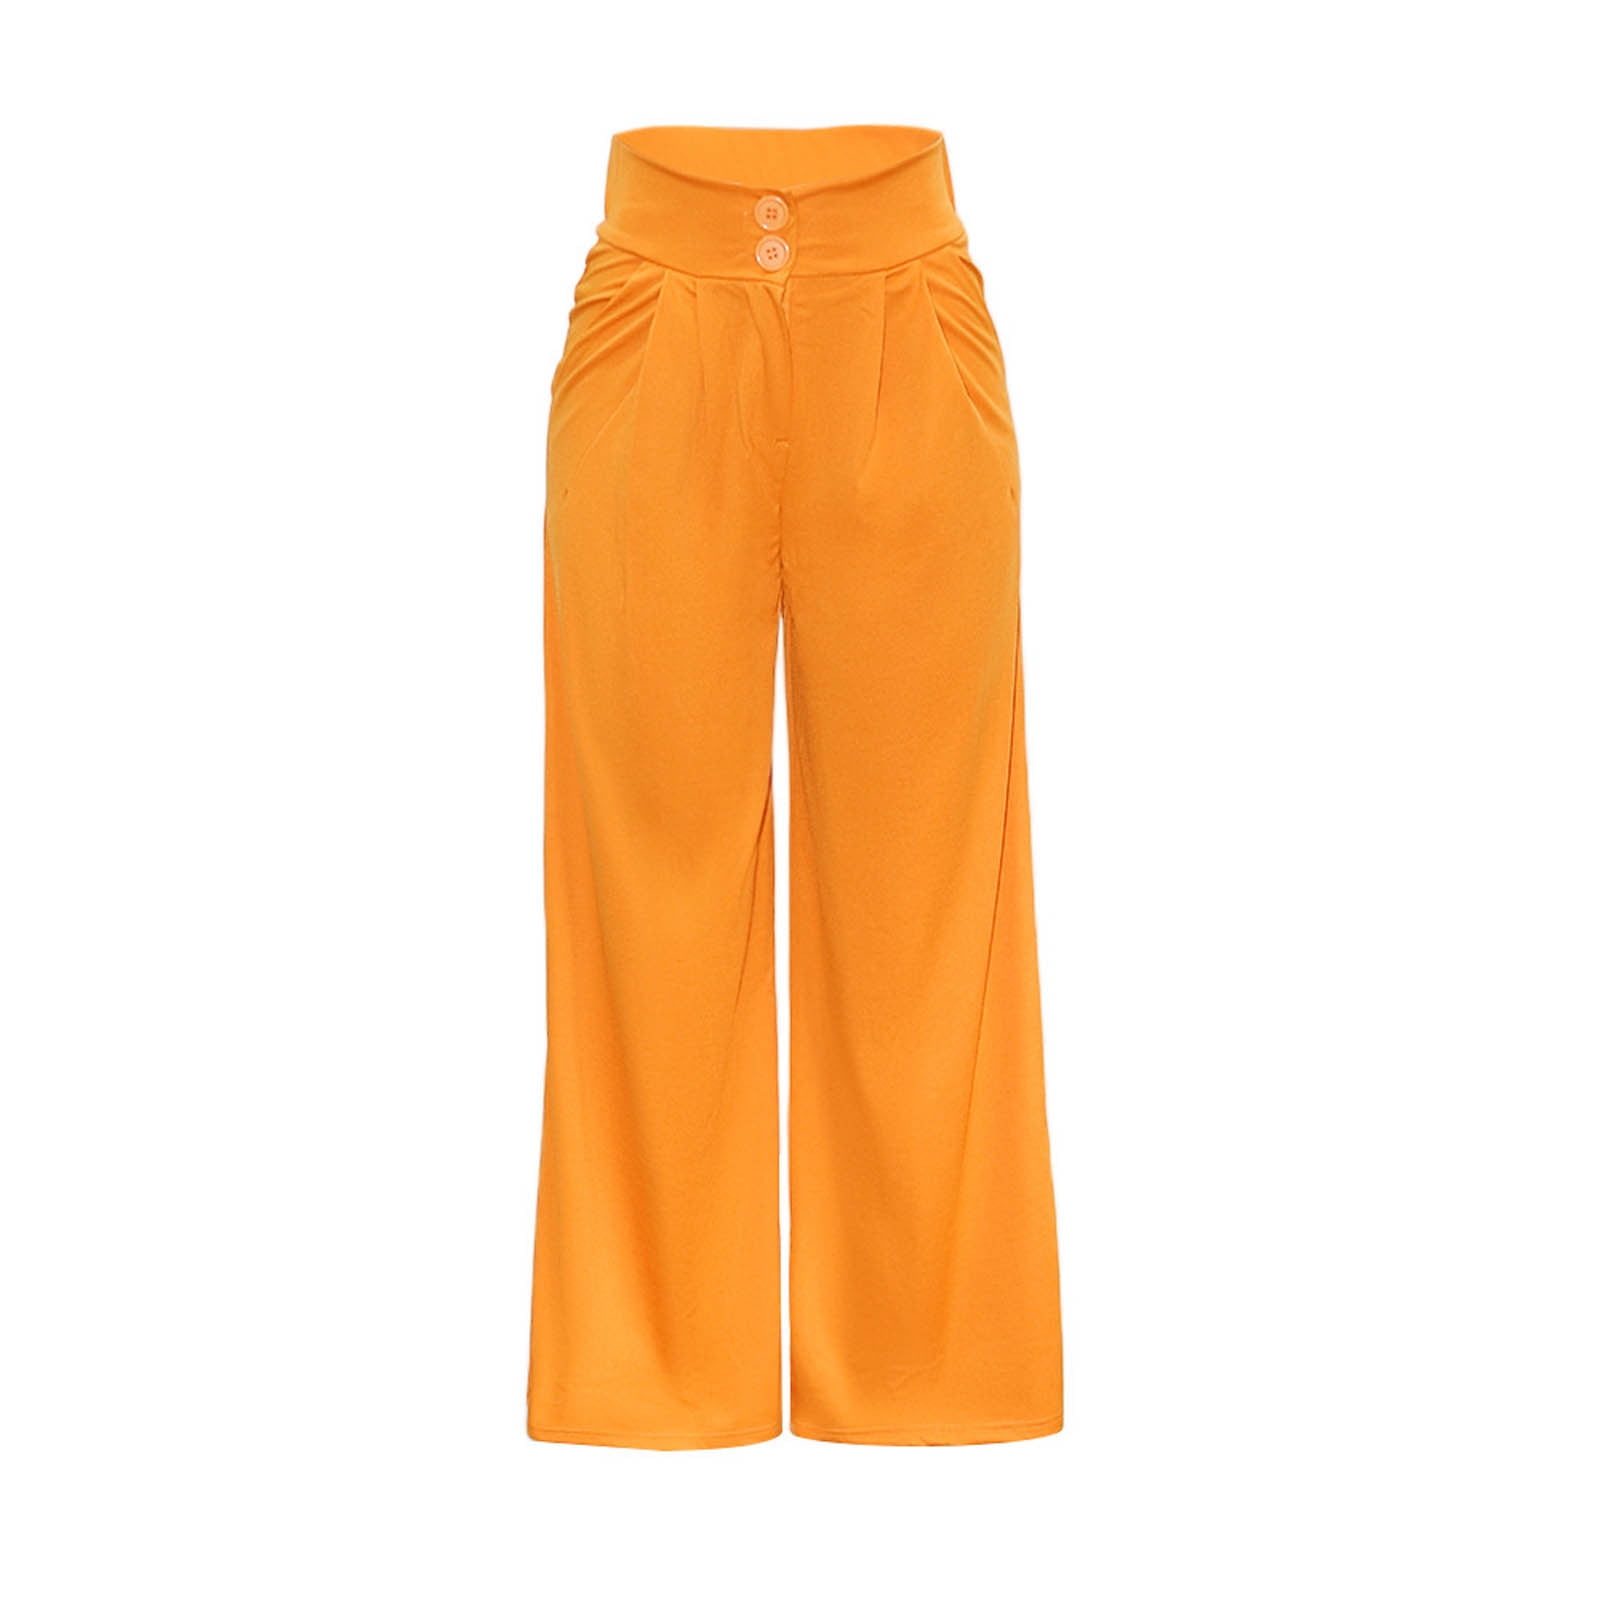 Wide Leg Pants for Women Solid Color High Waisted Palazzo Pants Casual Loose  Flowy Lounge Trousers with Pockets 